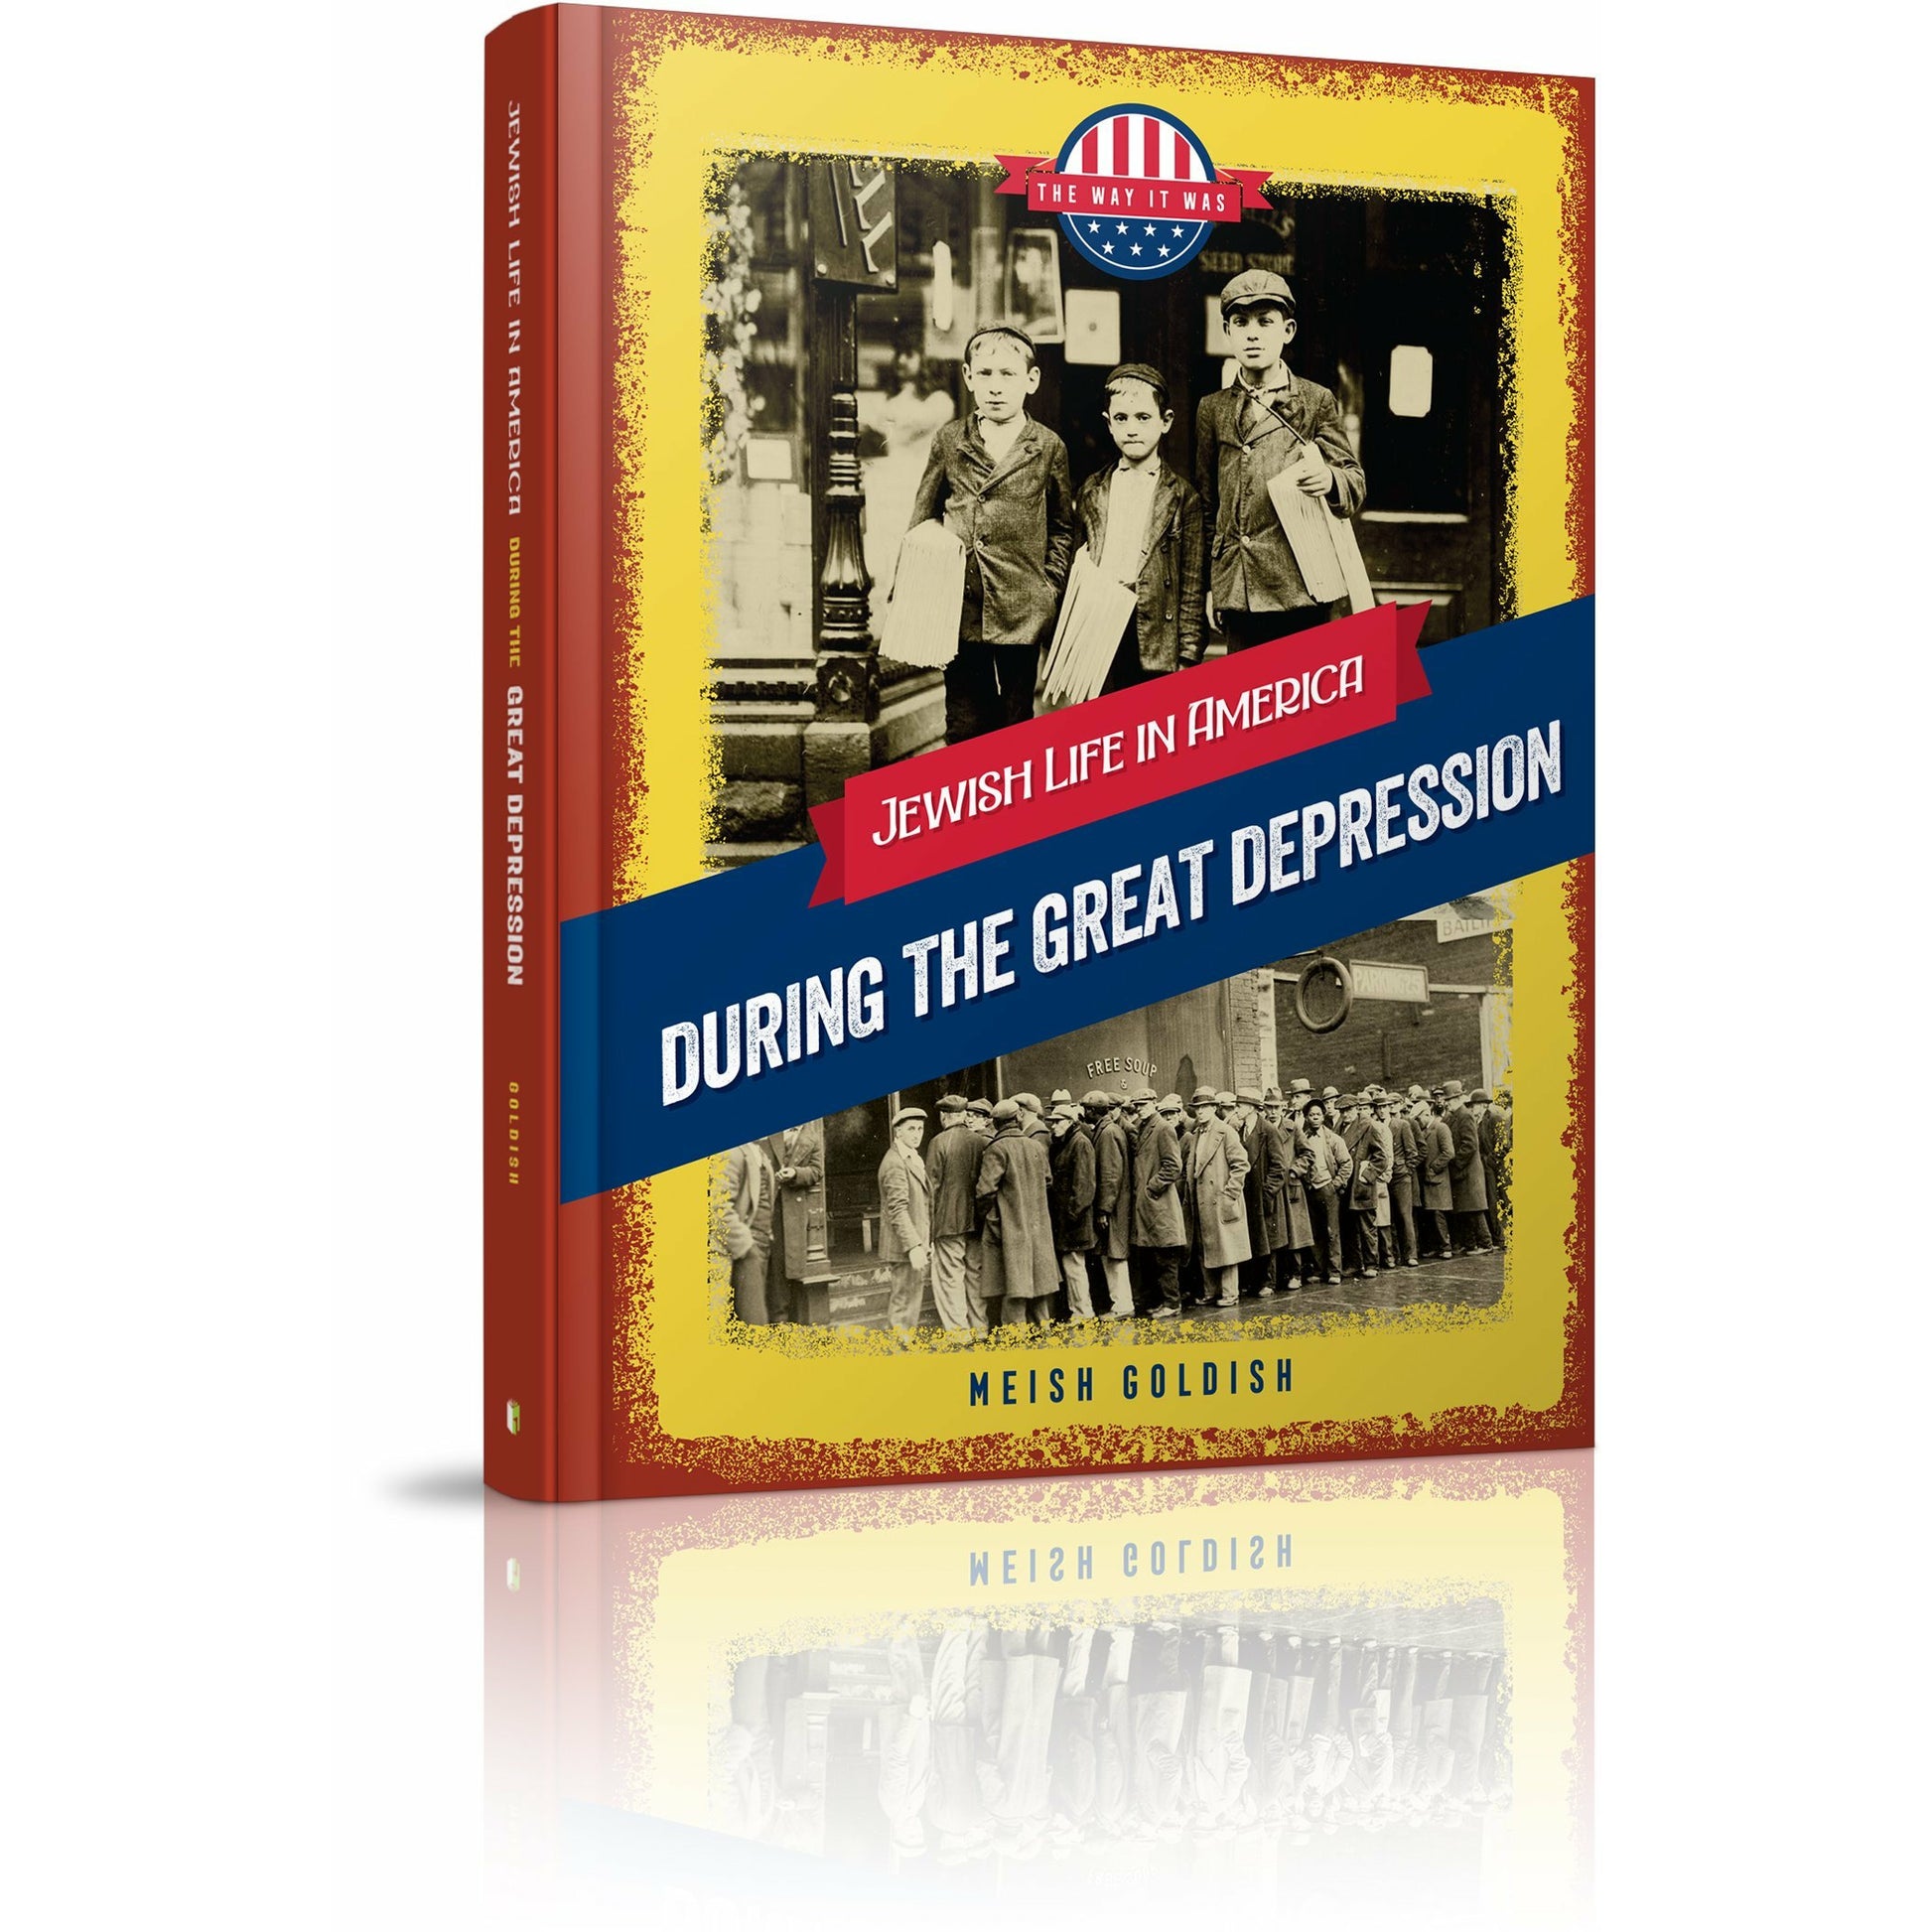 Jewish Life in America: During the Great Depression - 9781614656999 - Menucha Publishers Inc.